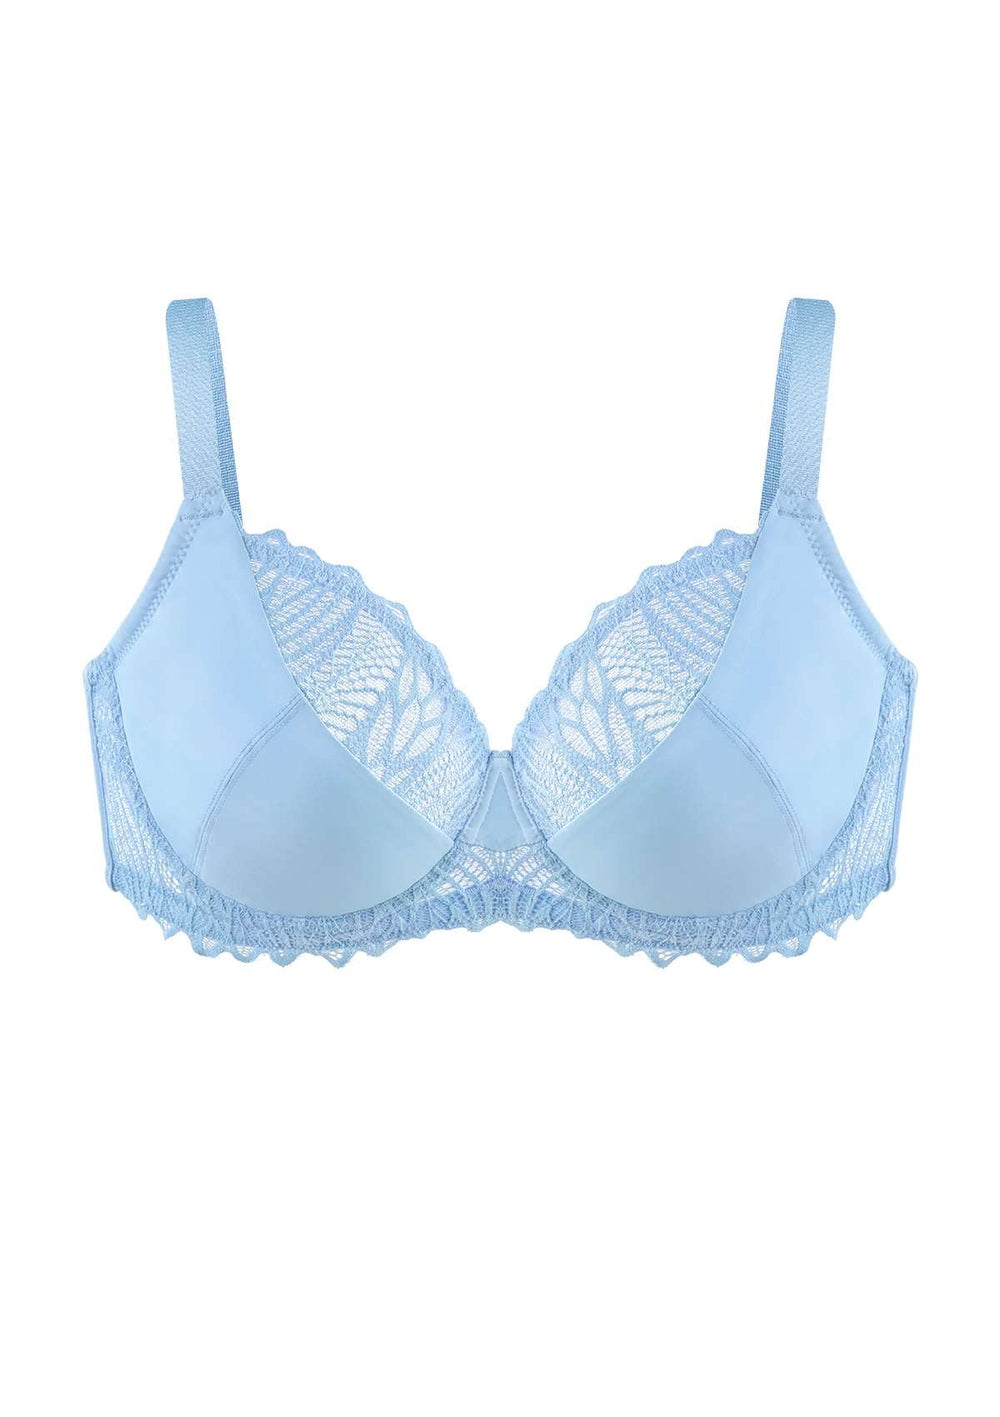 SOLD OUT! New! Beautiful Blue Bra and Underwear Set with Hot Pink Lace Trim  42C/Size 9